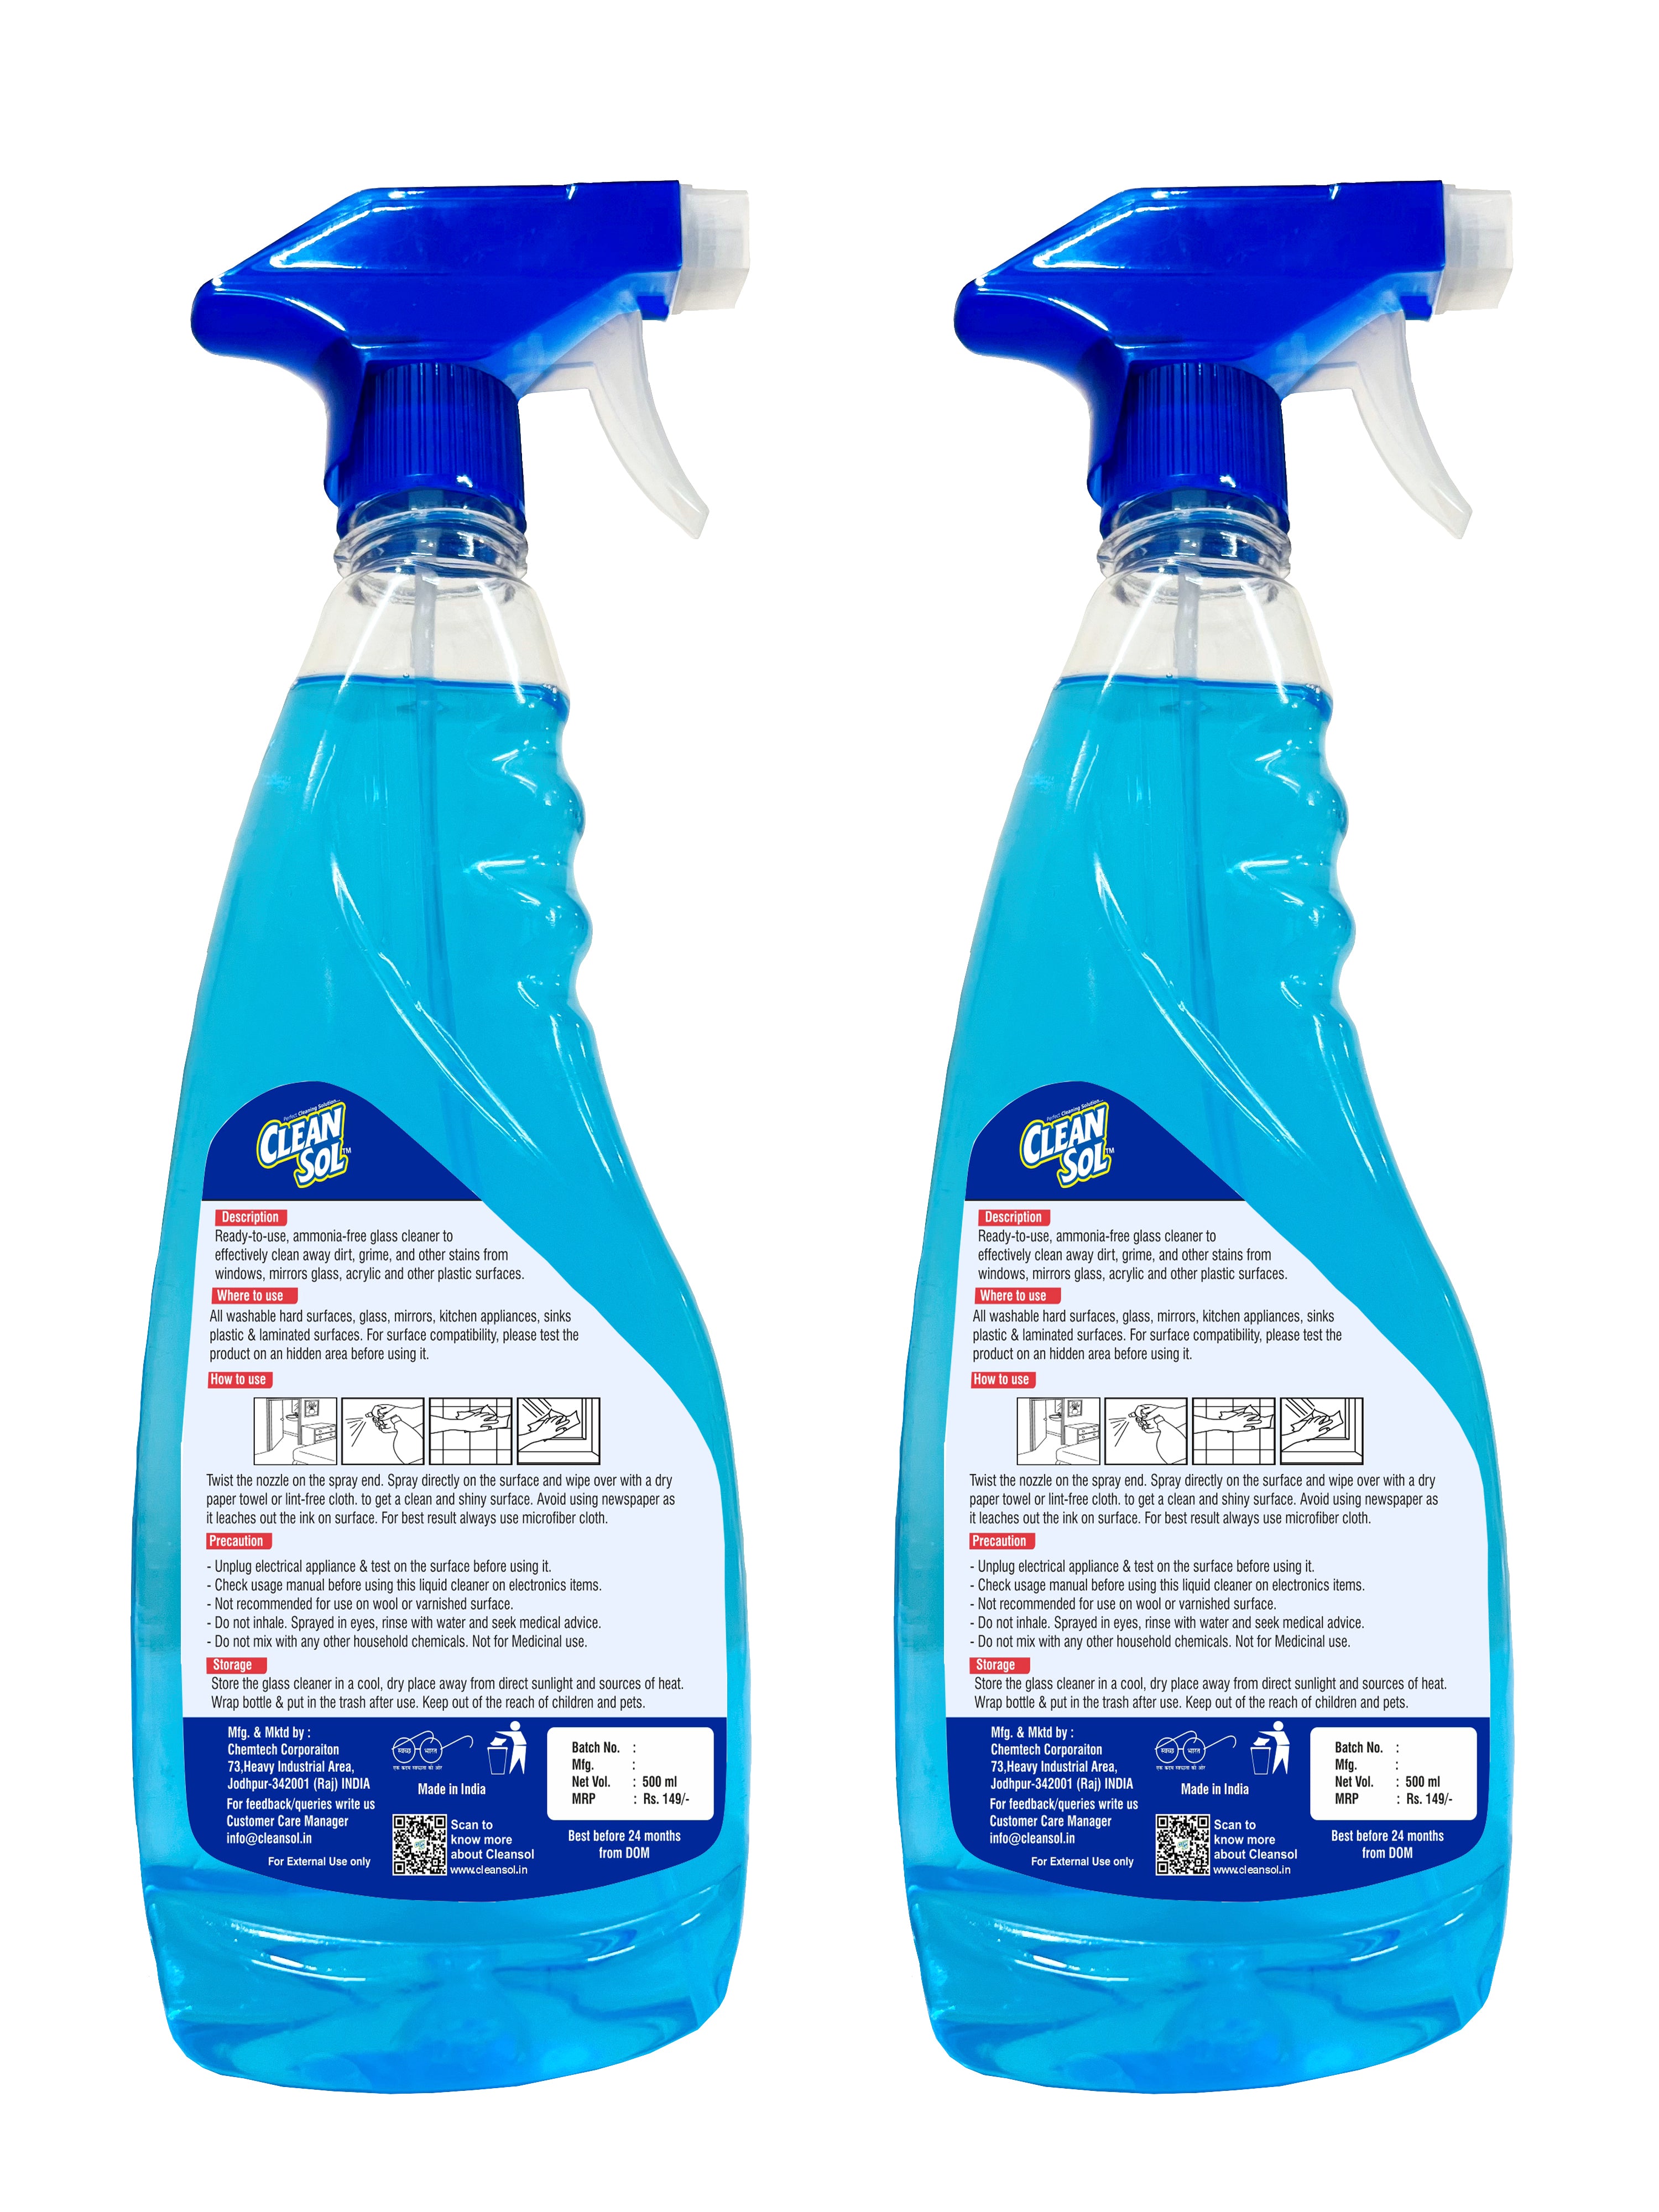 Cleansol Glass Cleaner Liquid Spray - 5 Litre